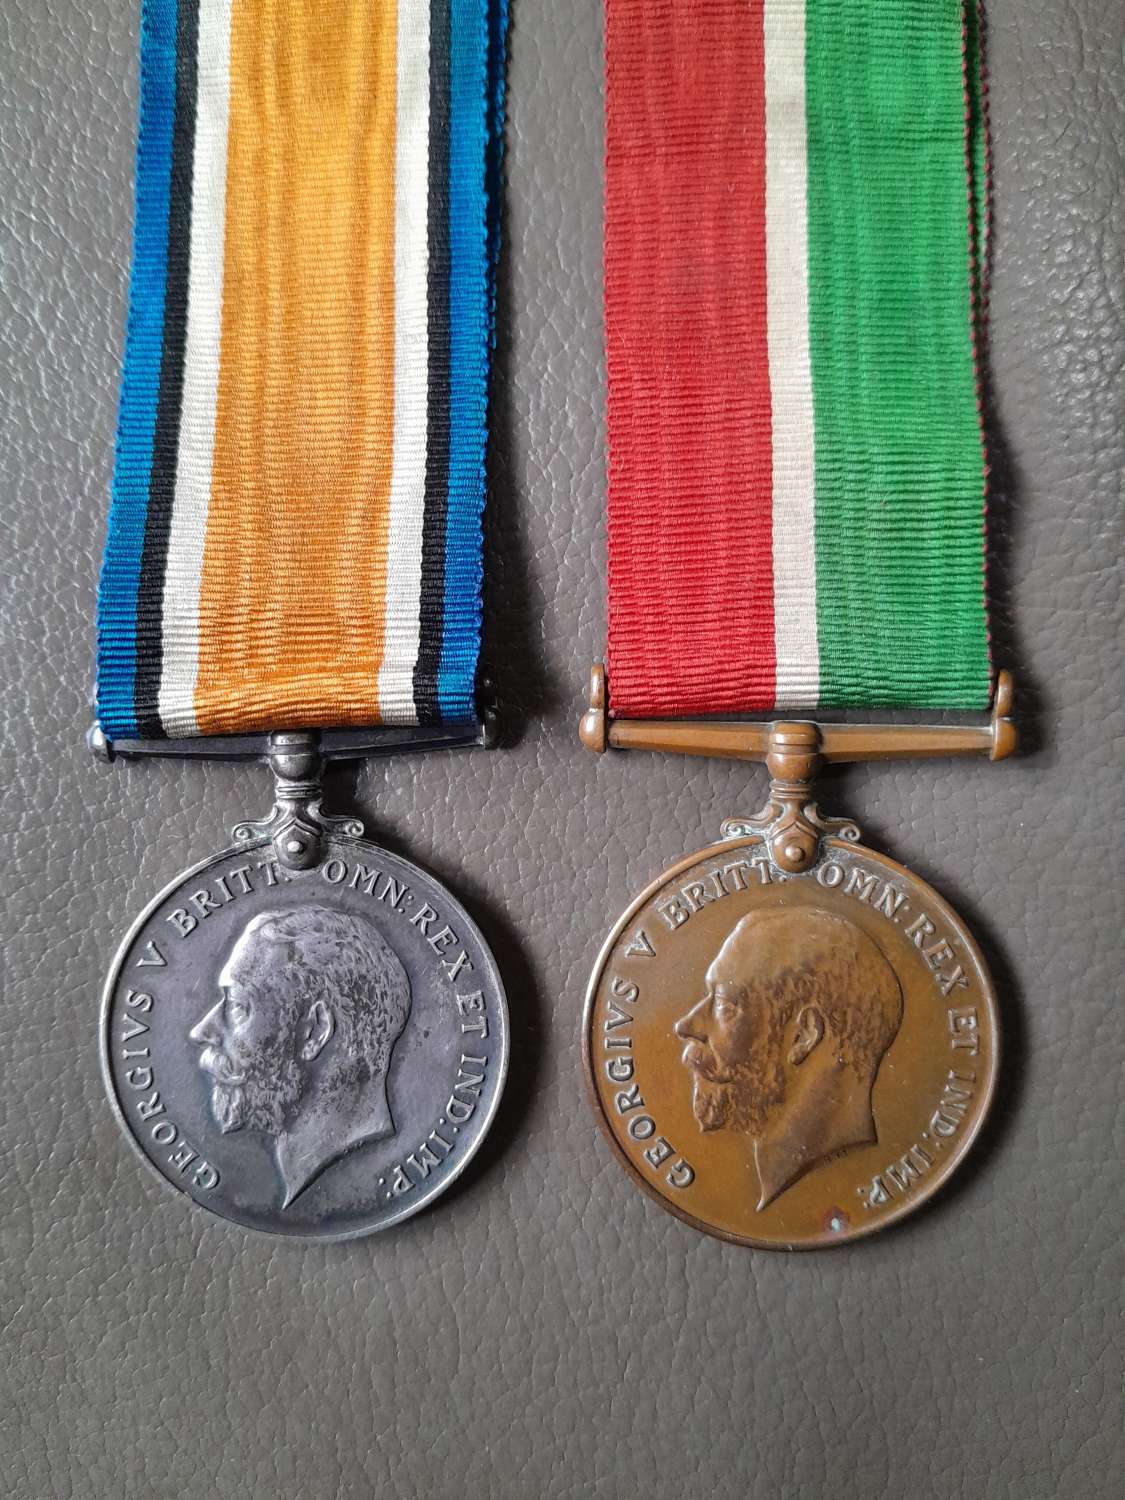 Merchantile Marine Medal to William J Yelloby and British War Medal